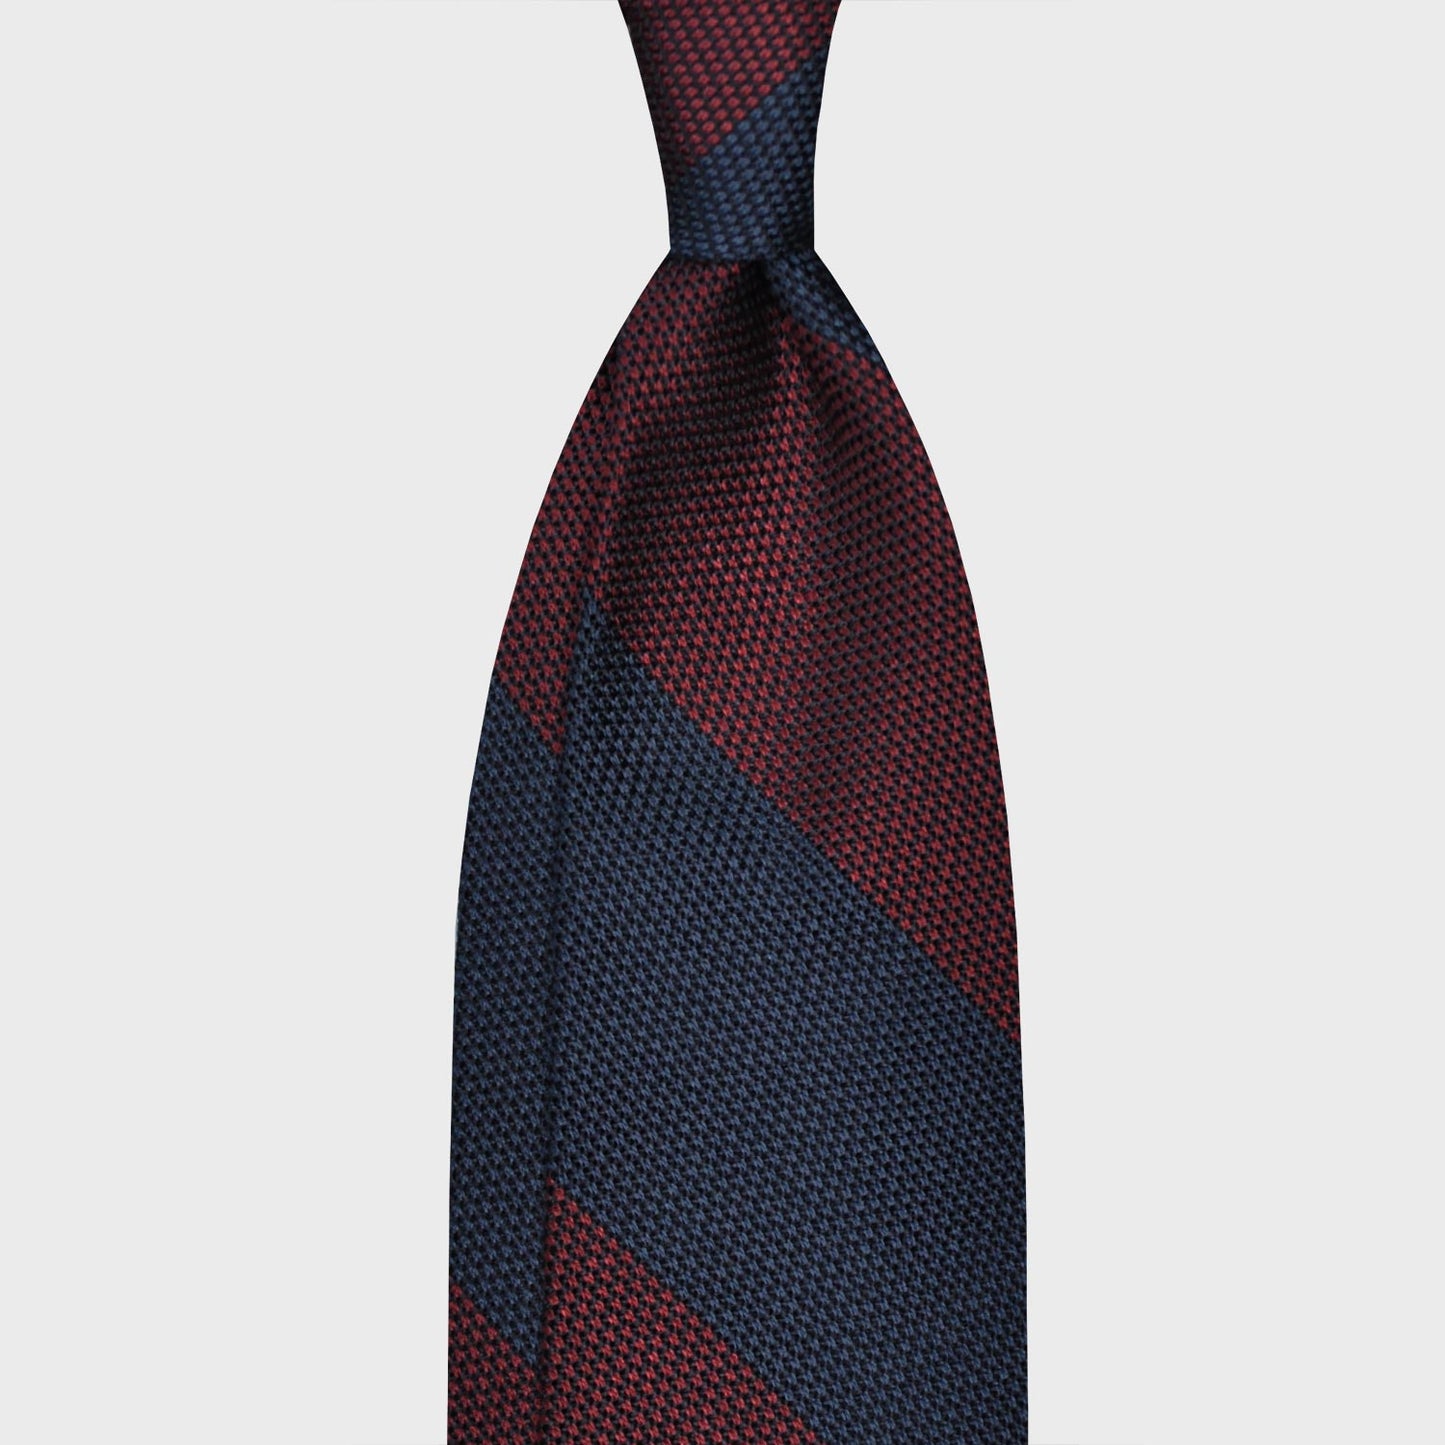 Load image into Gallery viewer, Burgundy Red Regimental Grenadine Silk Tie Wide Striped. Wide striped silk tie made with refined grenadine silk, hand made tie F.Marino Napoli exclusive for Wools Boutique Uomo, hand rolled edge, 3 folds unlined, striped burgundy red and navy blue
